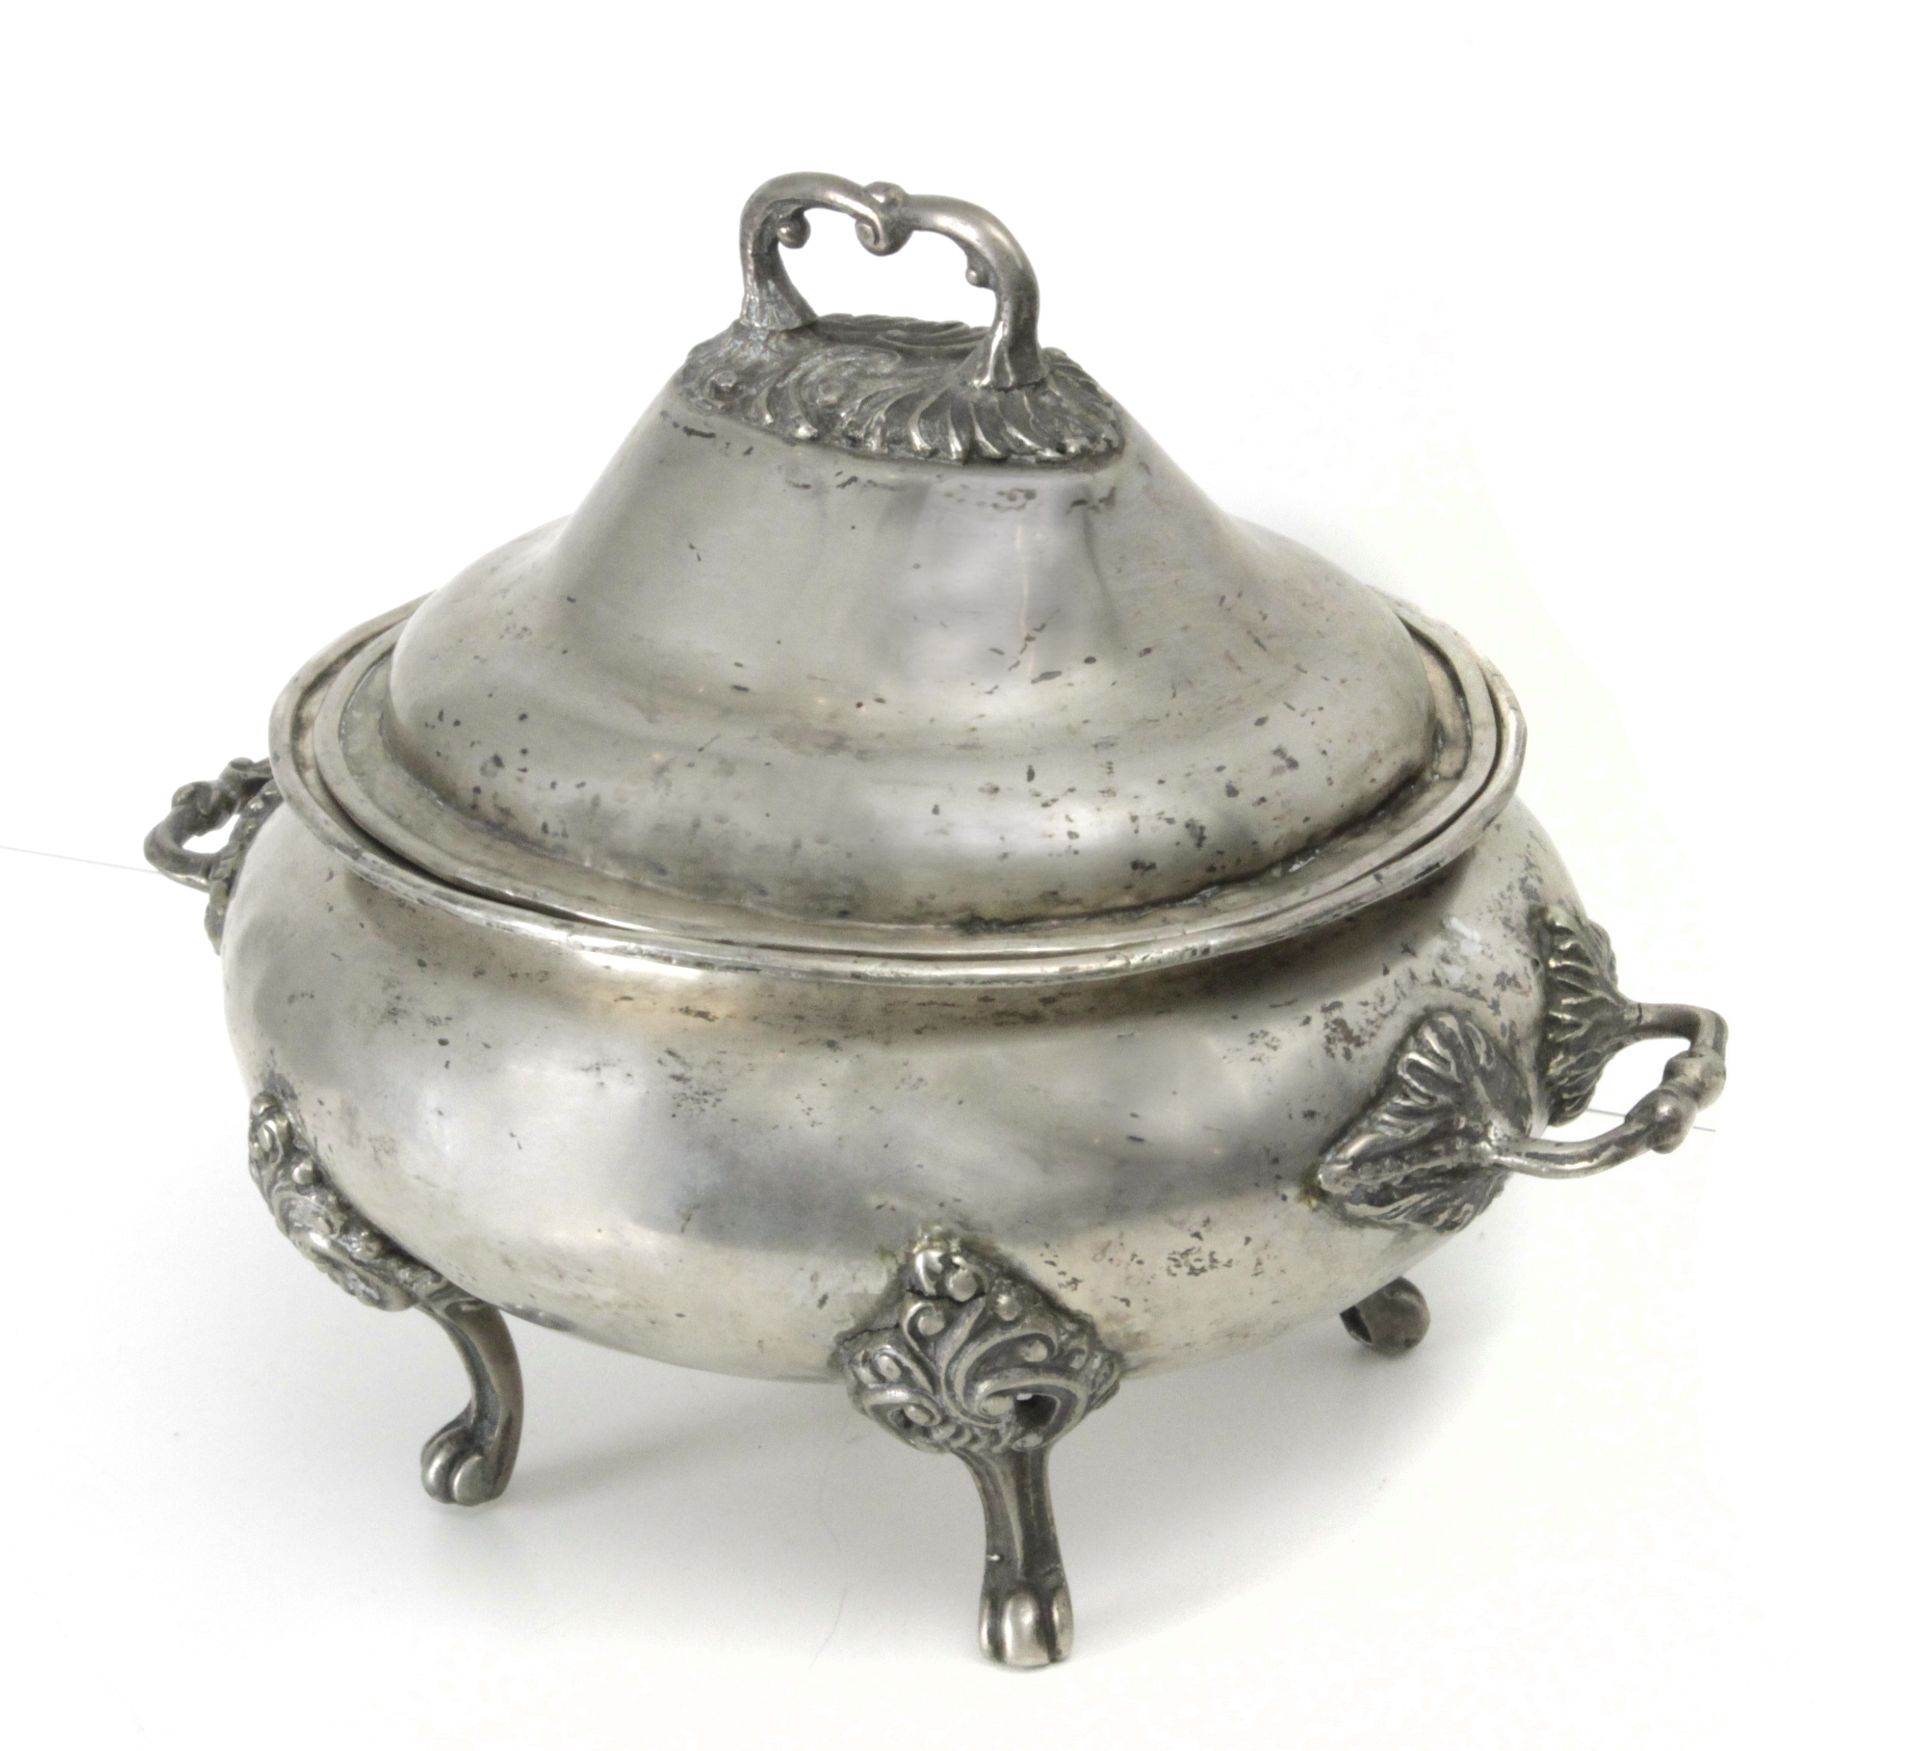 A 17th-18th centuries colonial tureen from Viceroyalty of Nueva España in Mexican silver